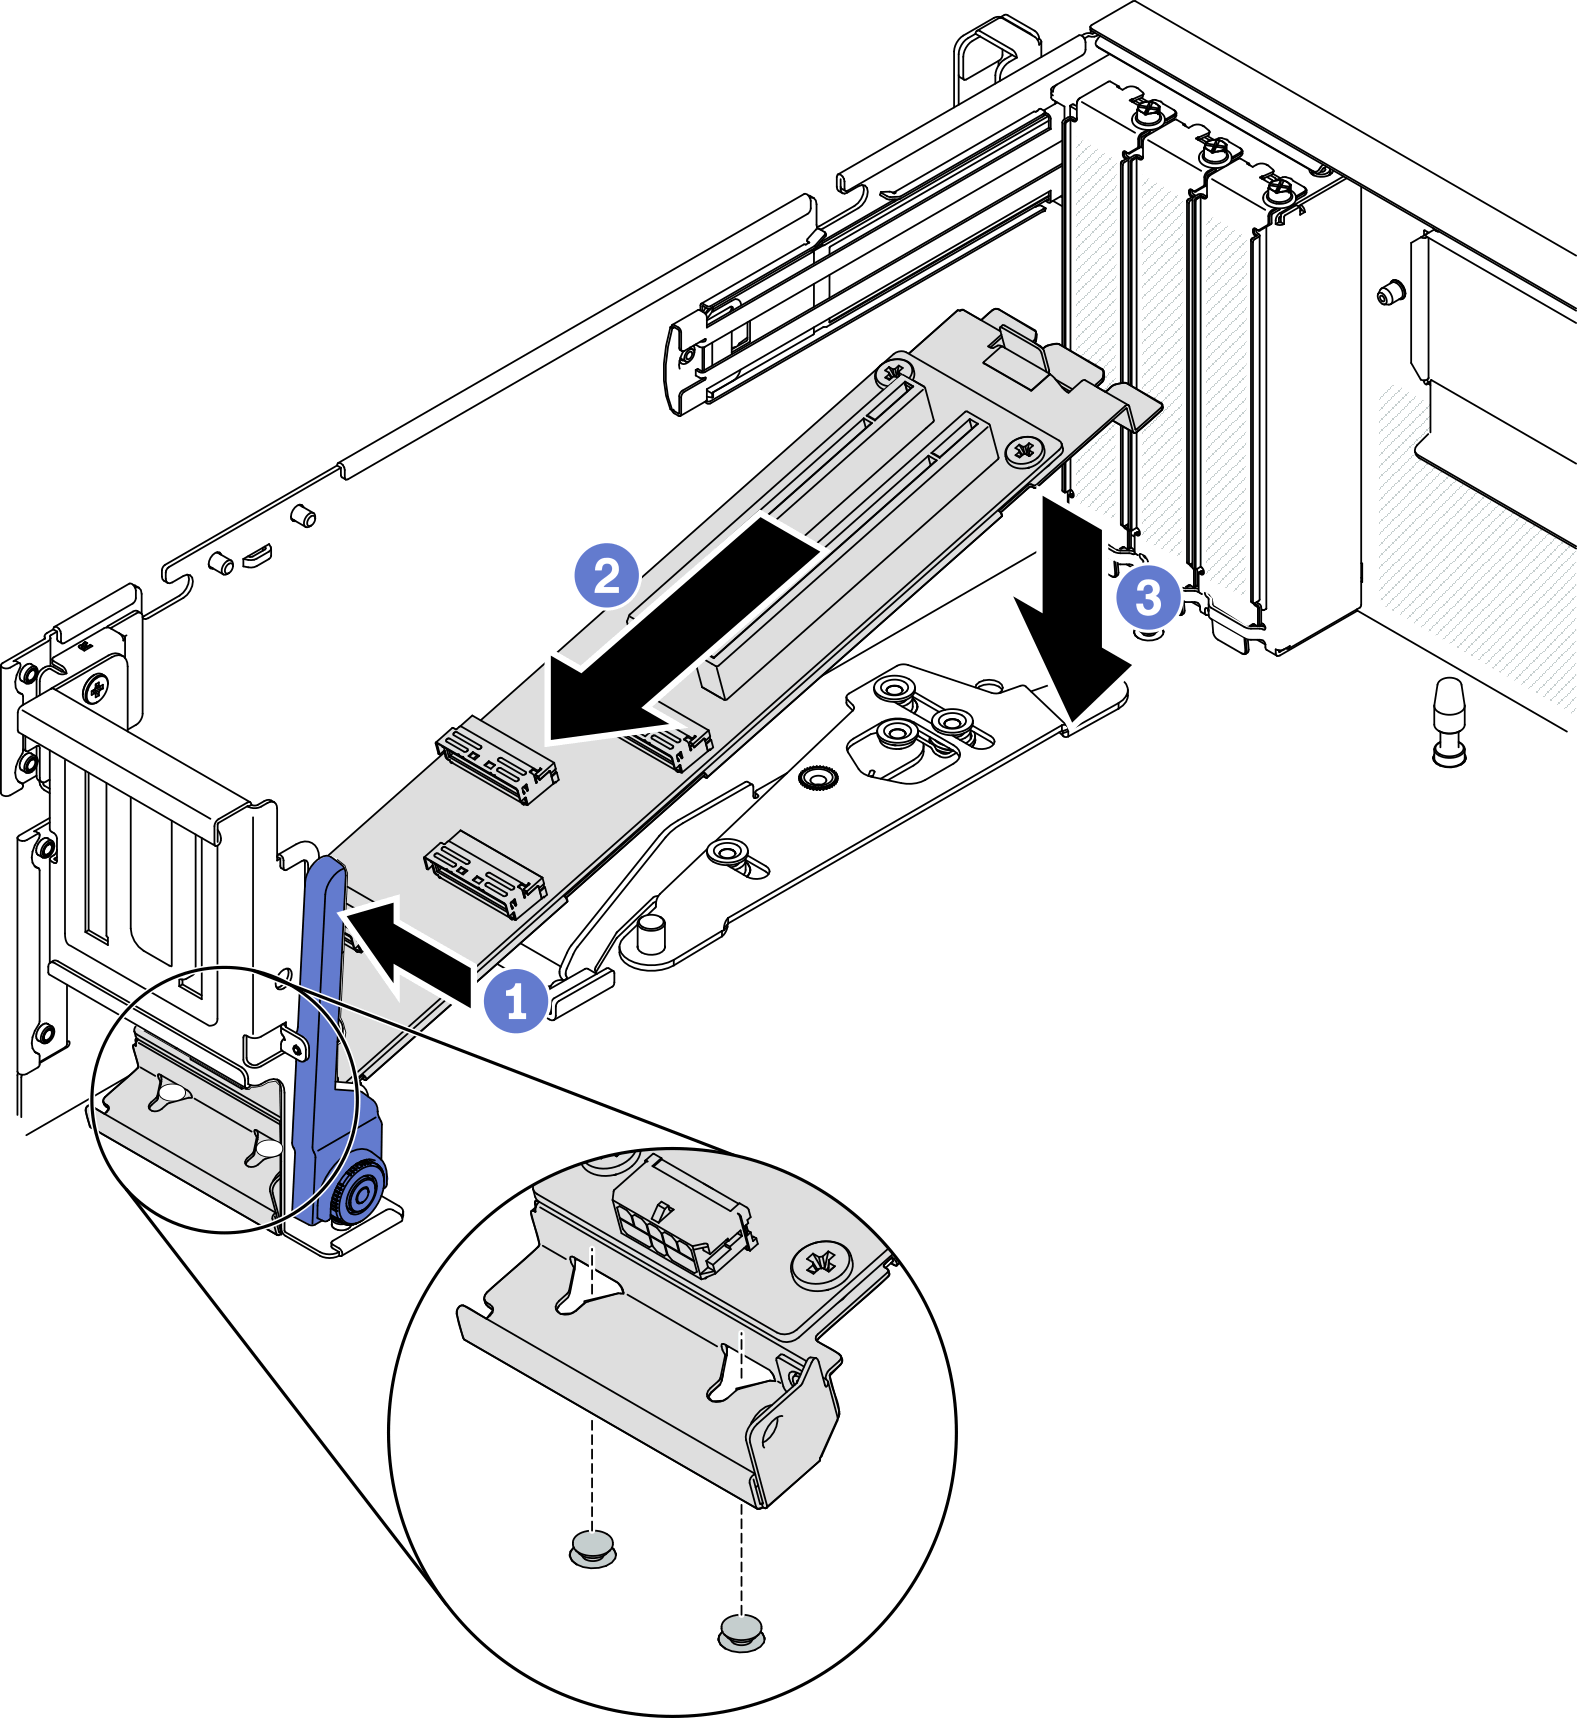 Placing the 前面出入力拡張ボード・モジュール into the chassis